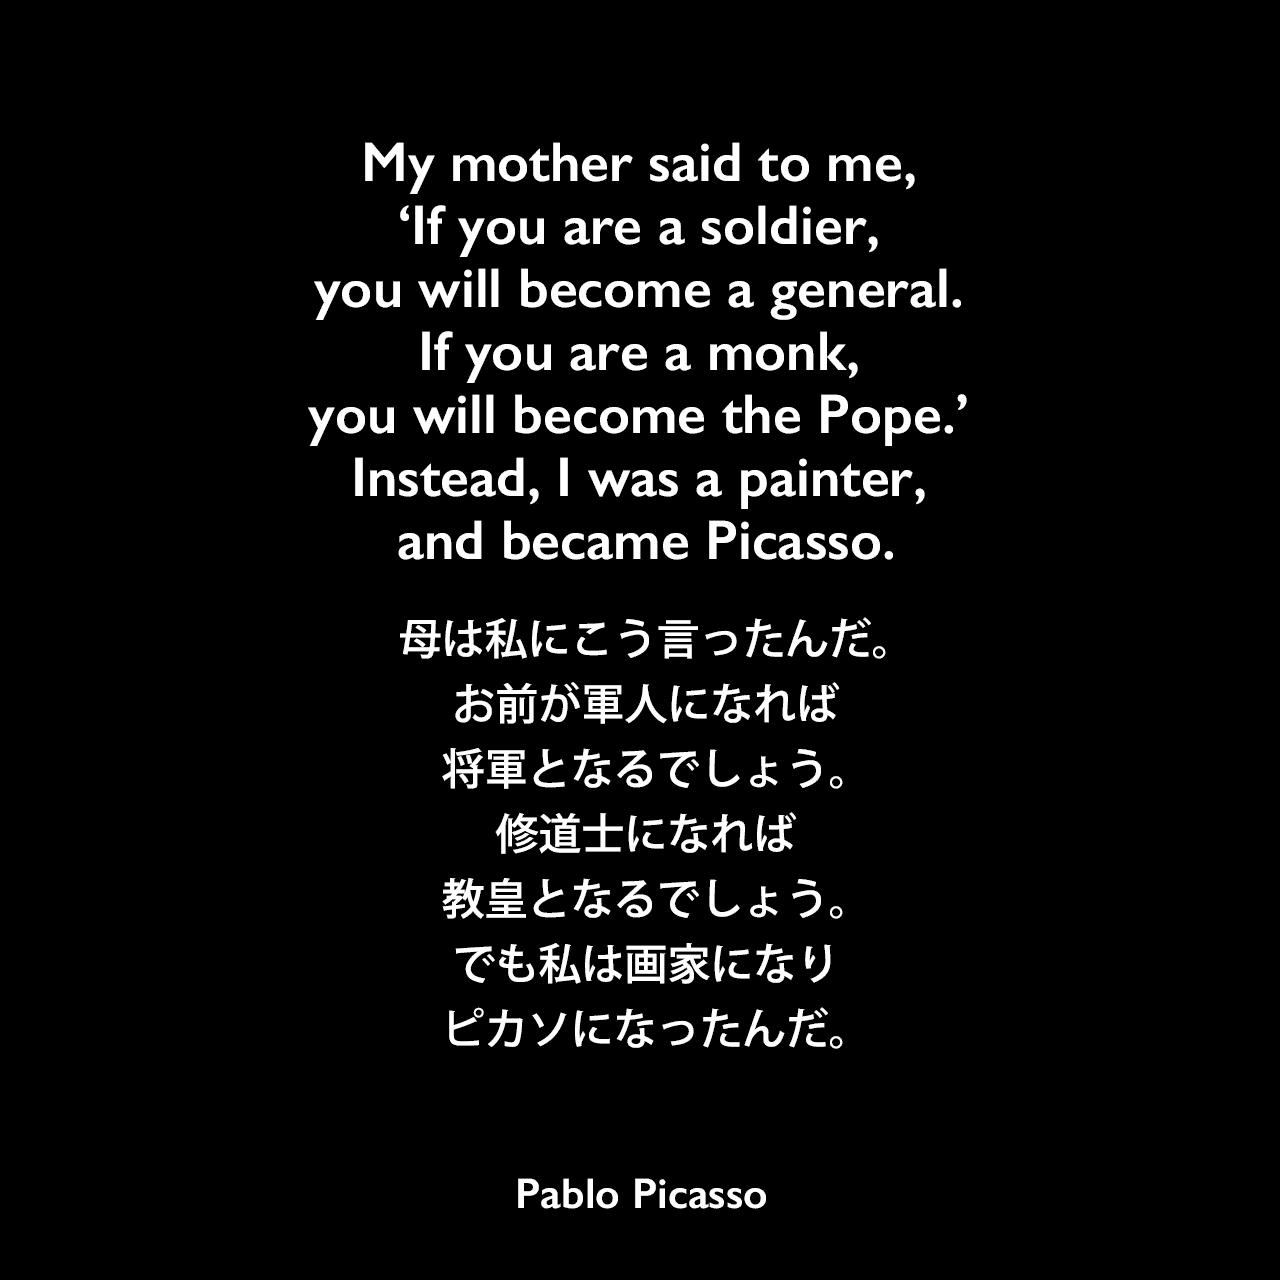 My mother said to me, ‘If you are a soldier, you will become a general. If you are a monk, you will become the Pope.’ Instead, I was a painter, and became Picasso.母は私にこう言ったんだ。お前が軍人になれば、将軍となるでしょう。修道士になれば、教皇となるでしょう。でも私は画家になり、ピカソになったんだ。- François Gilotの本「Life with Picasso」よりPablo Picasso